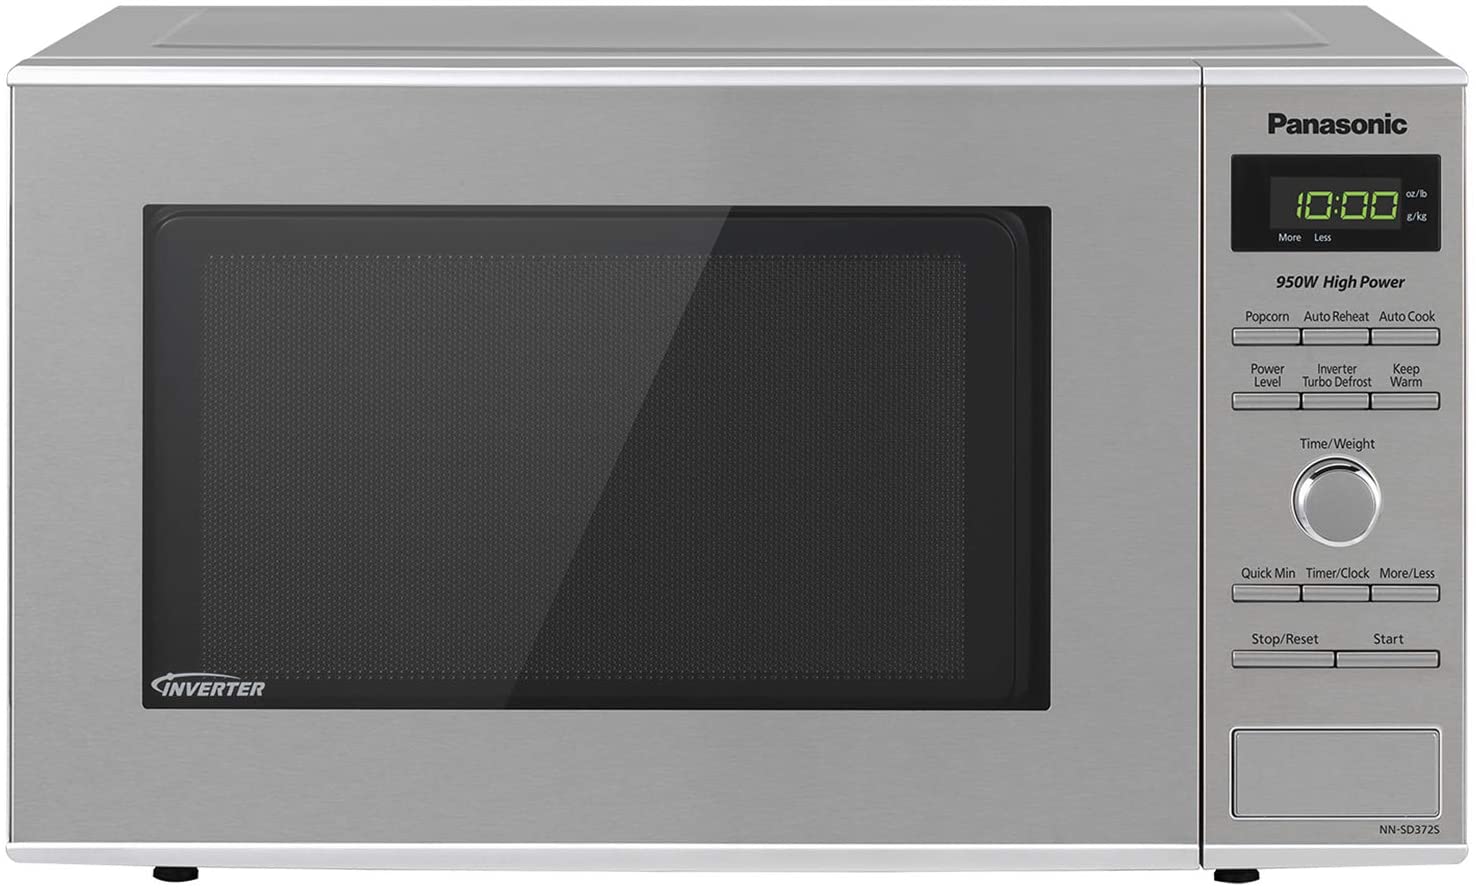 Panasonic Microwave Oven with inverter technology